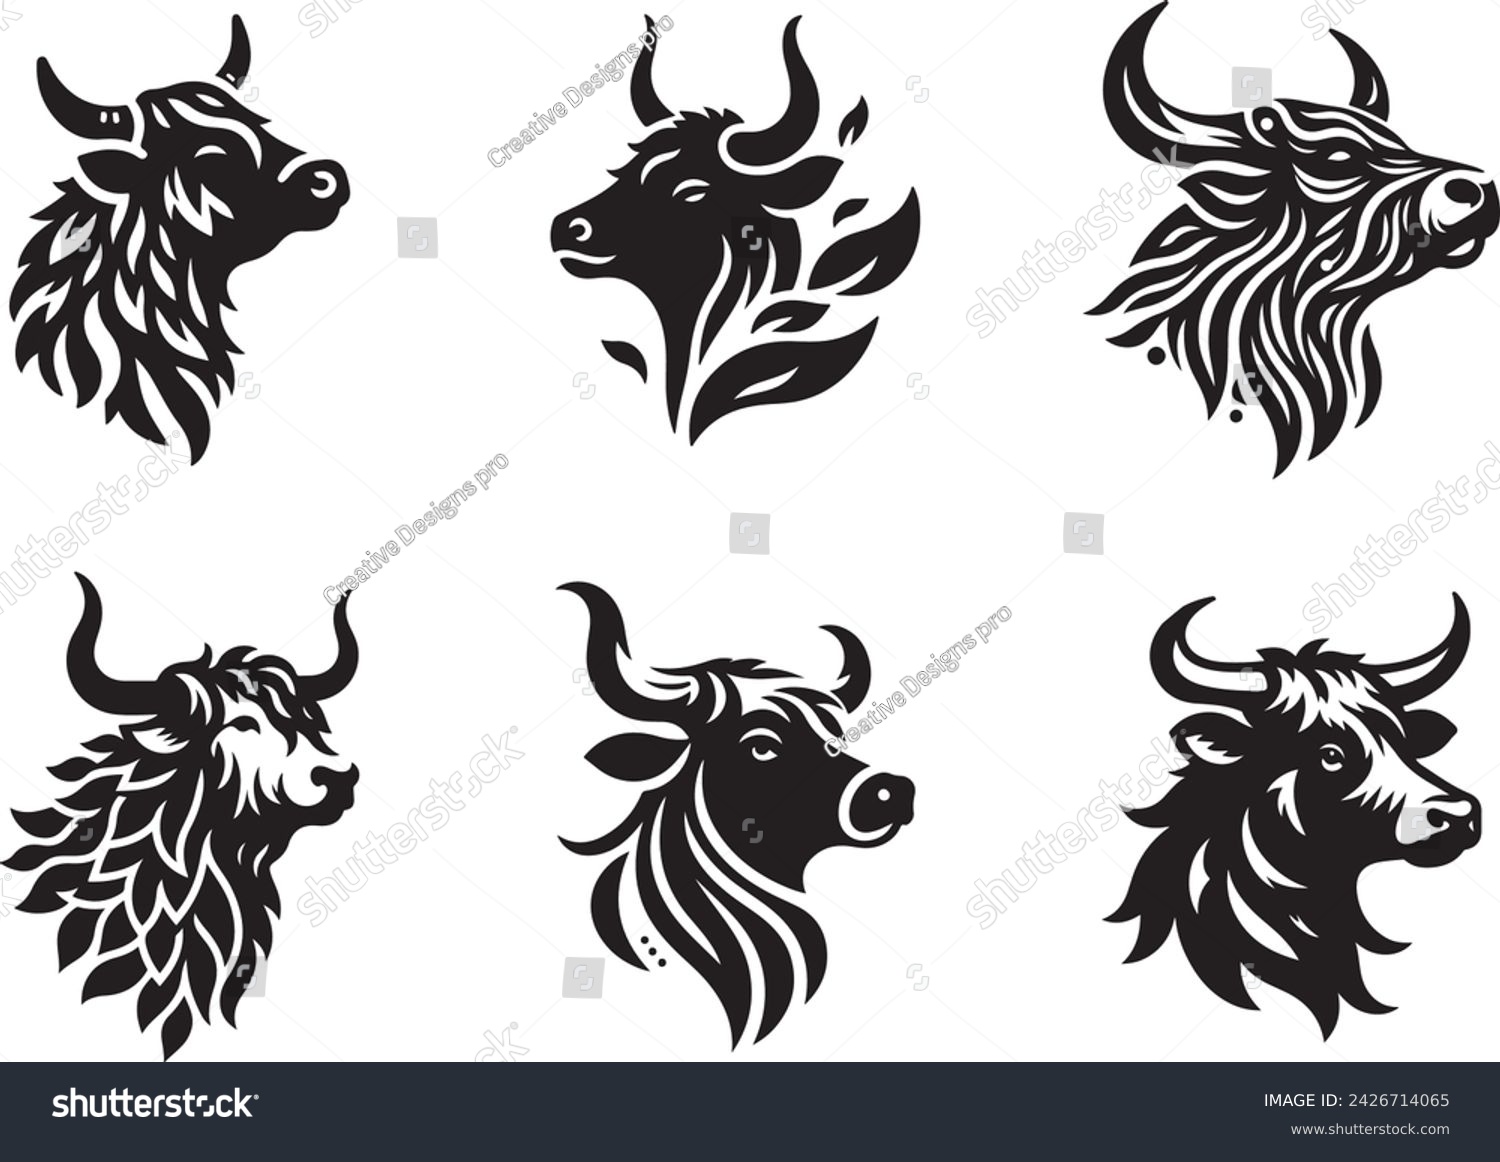 SVG of cow head vector illustration, p r i n t able svg